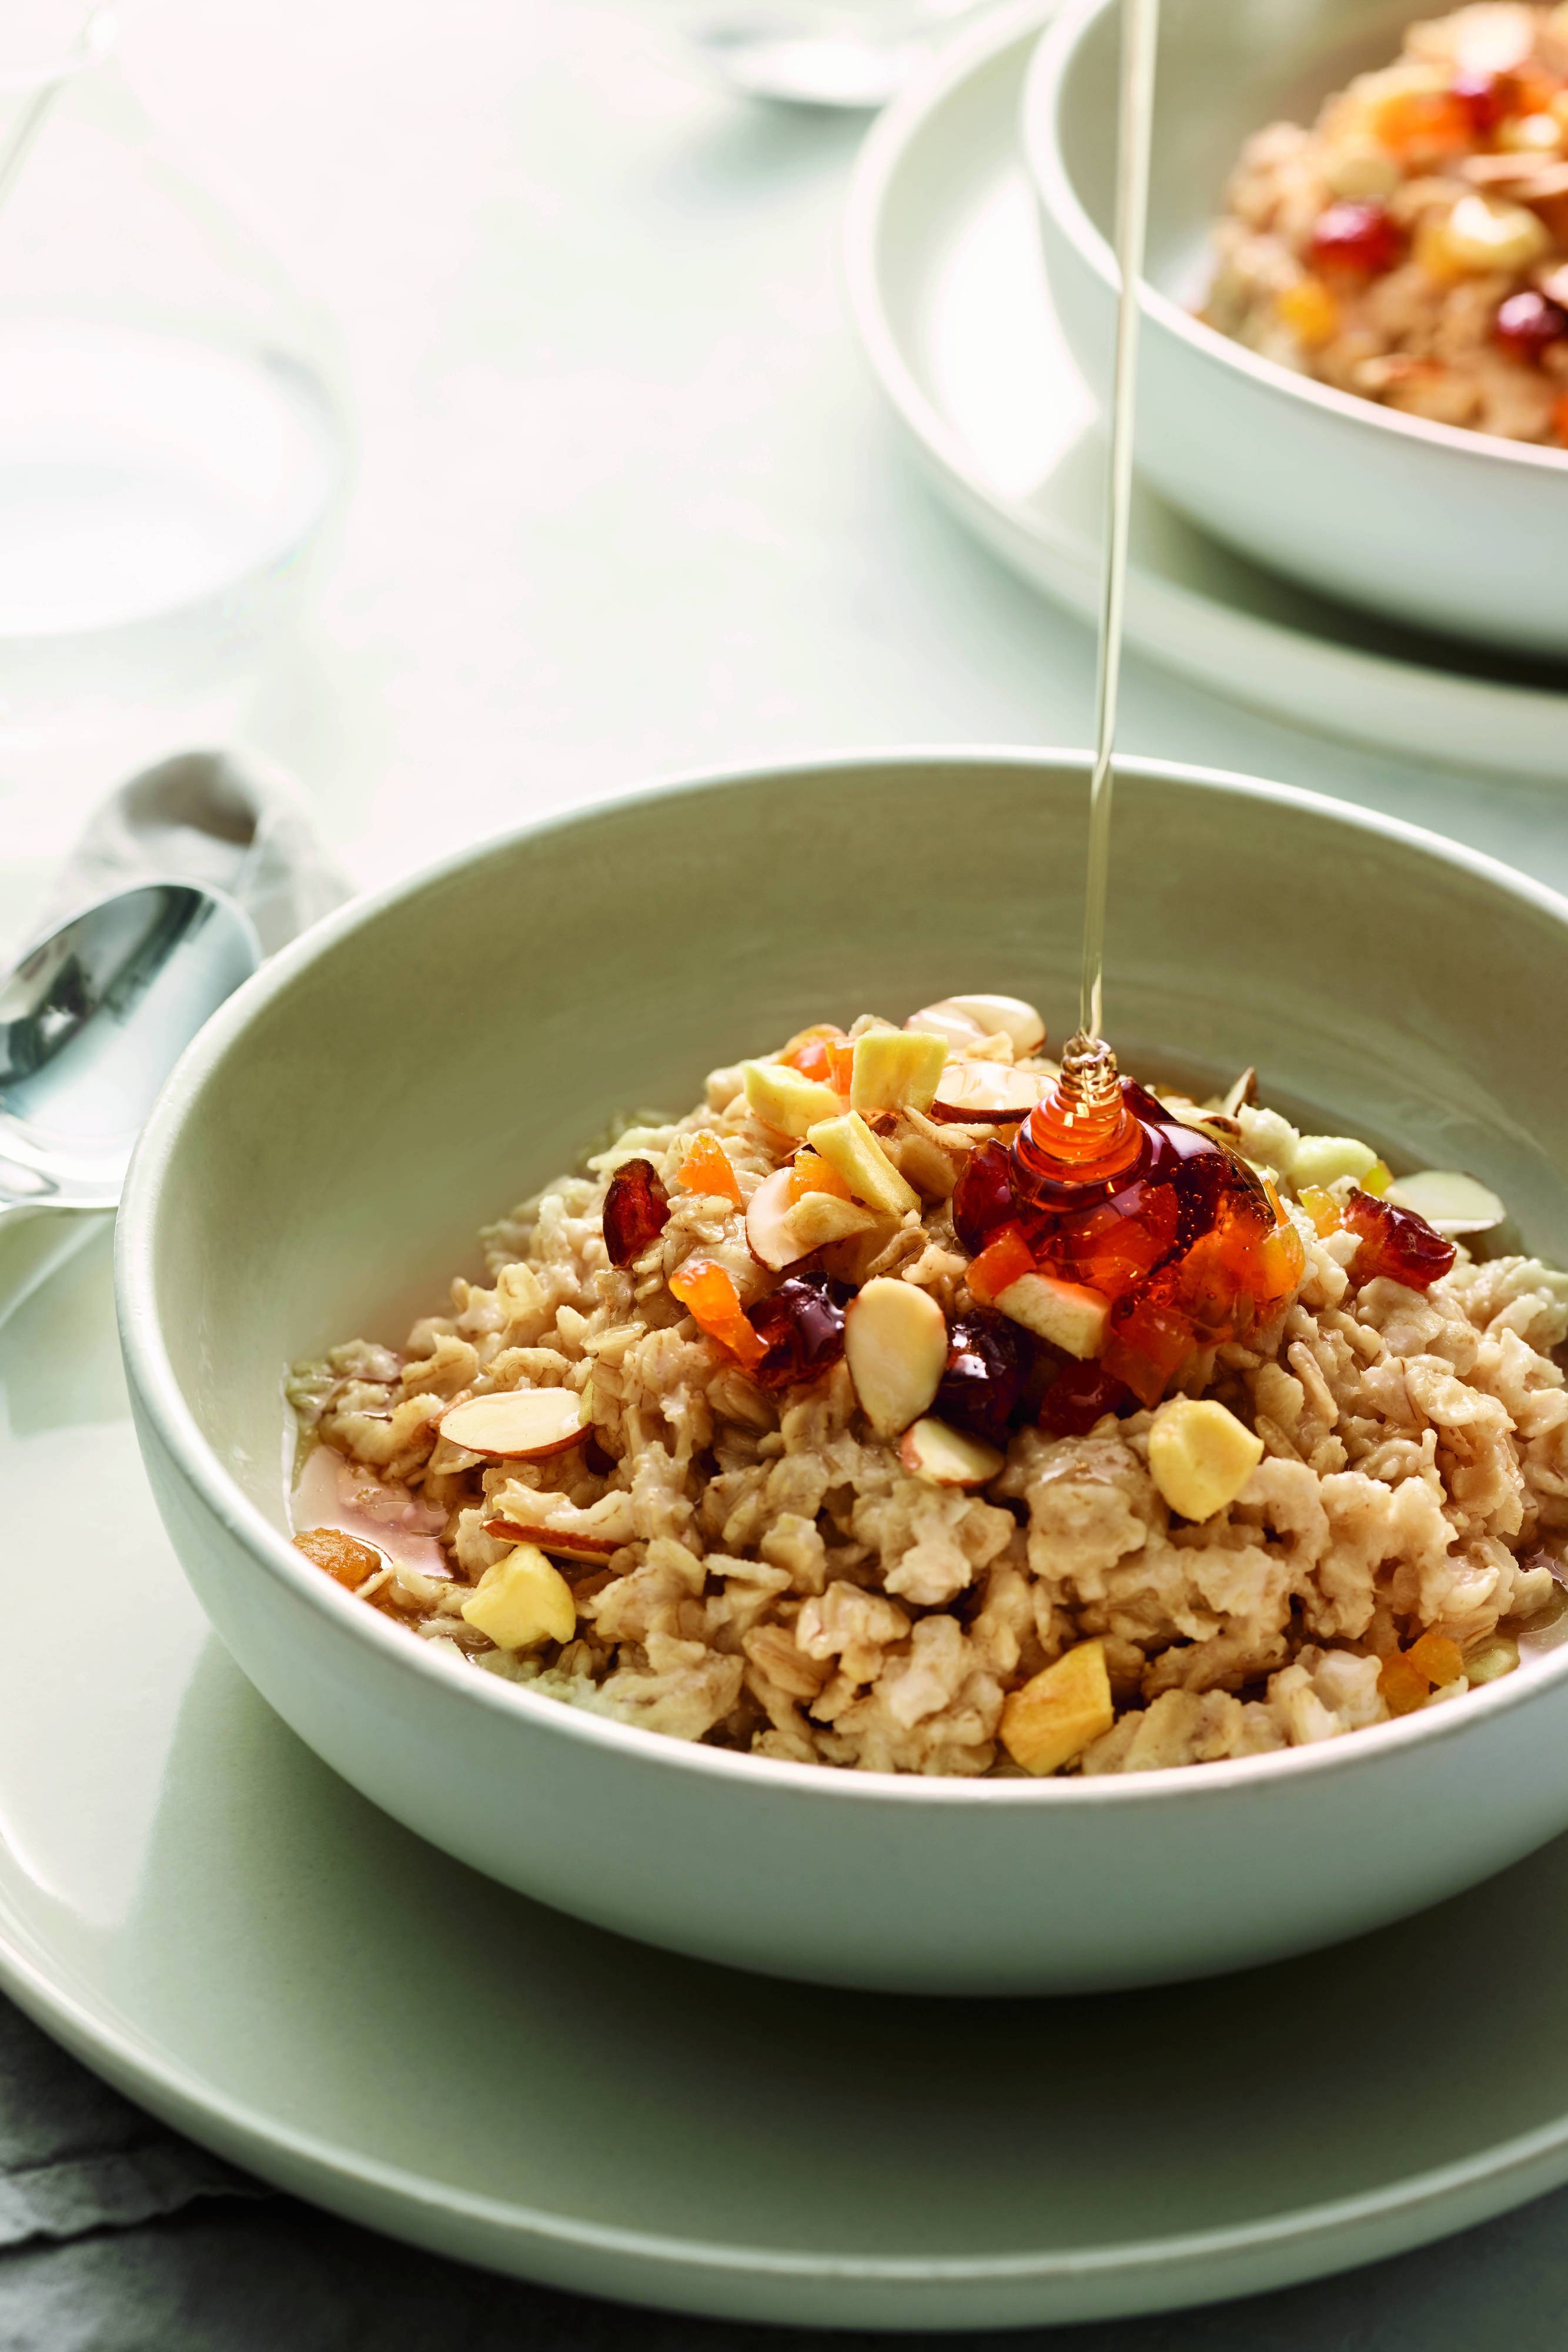 Oatmeal with Fresh & Dried Fruit, Nuts & Honey